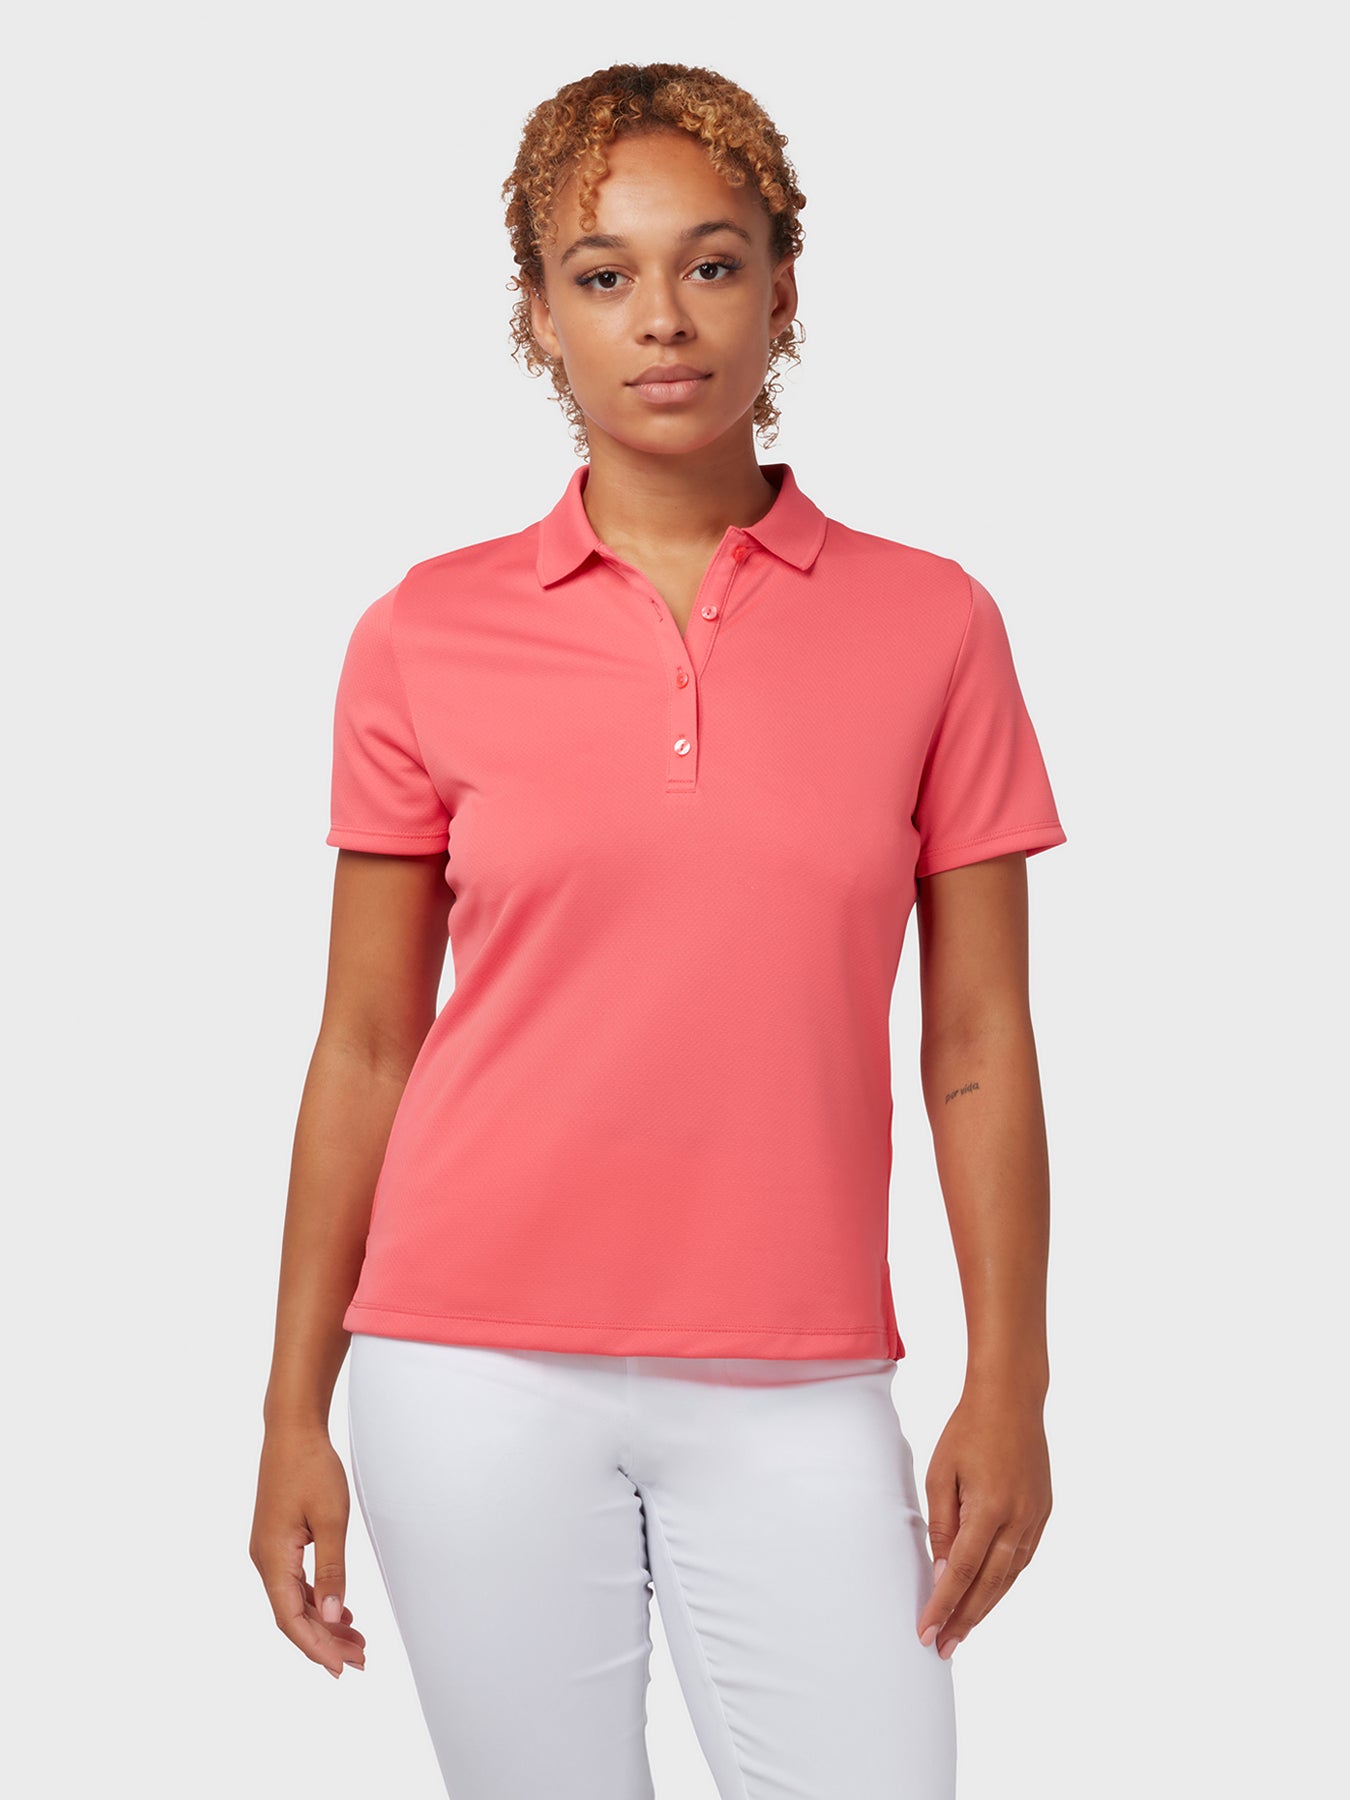 View Swing Tech Womens Polo In Coral Paradise Coral Paradise S information